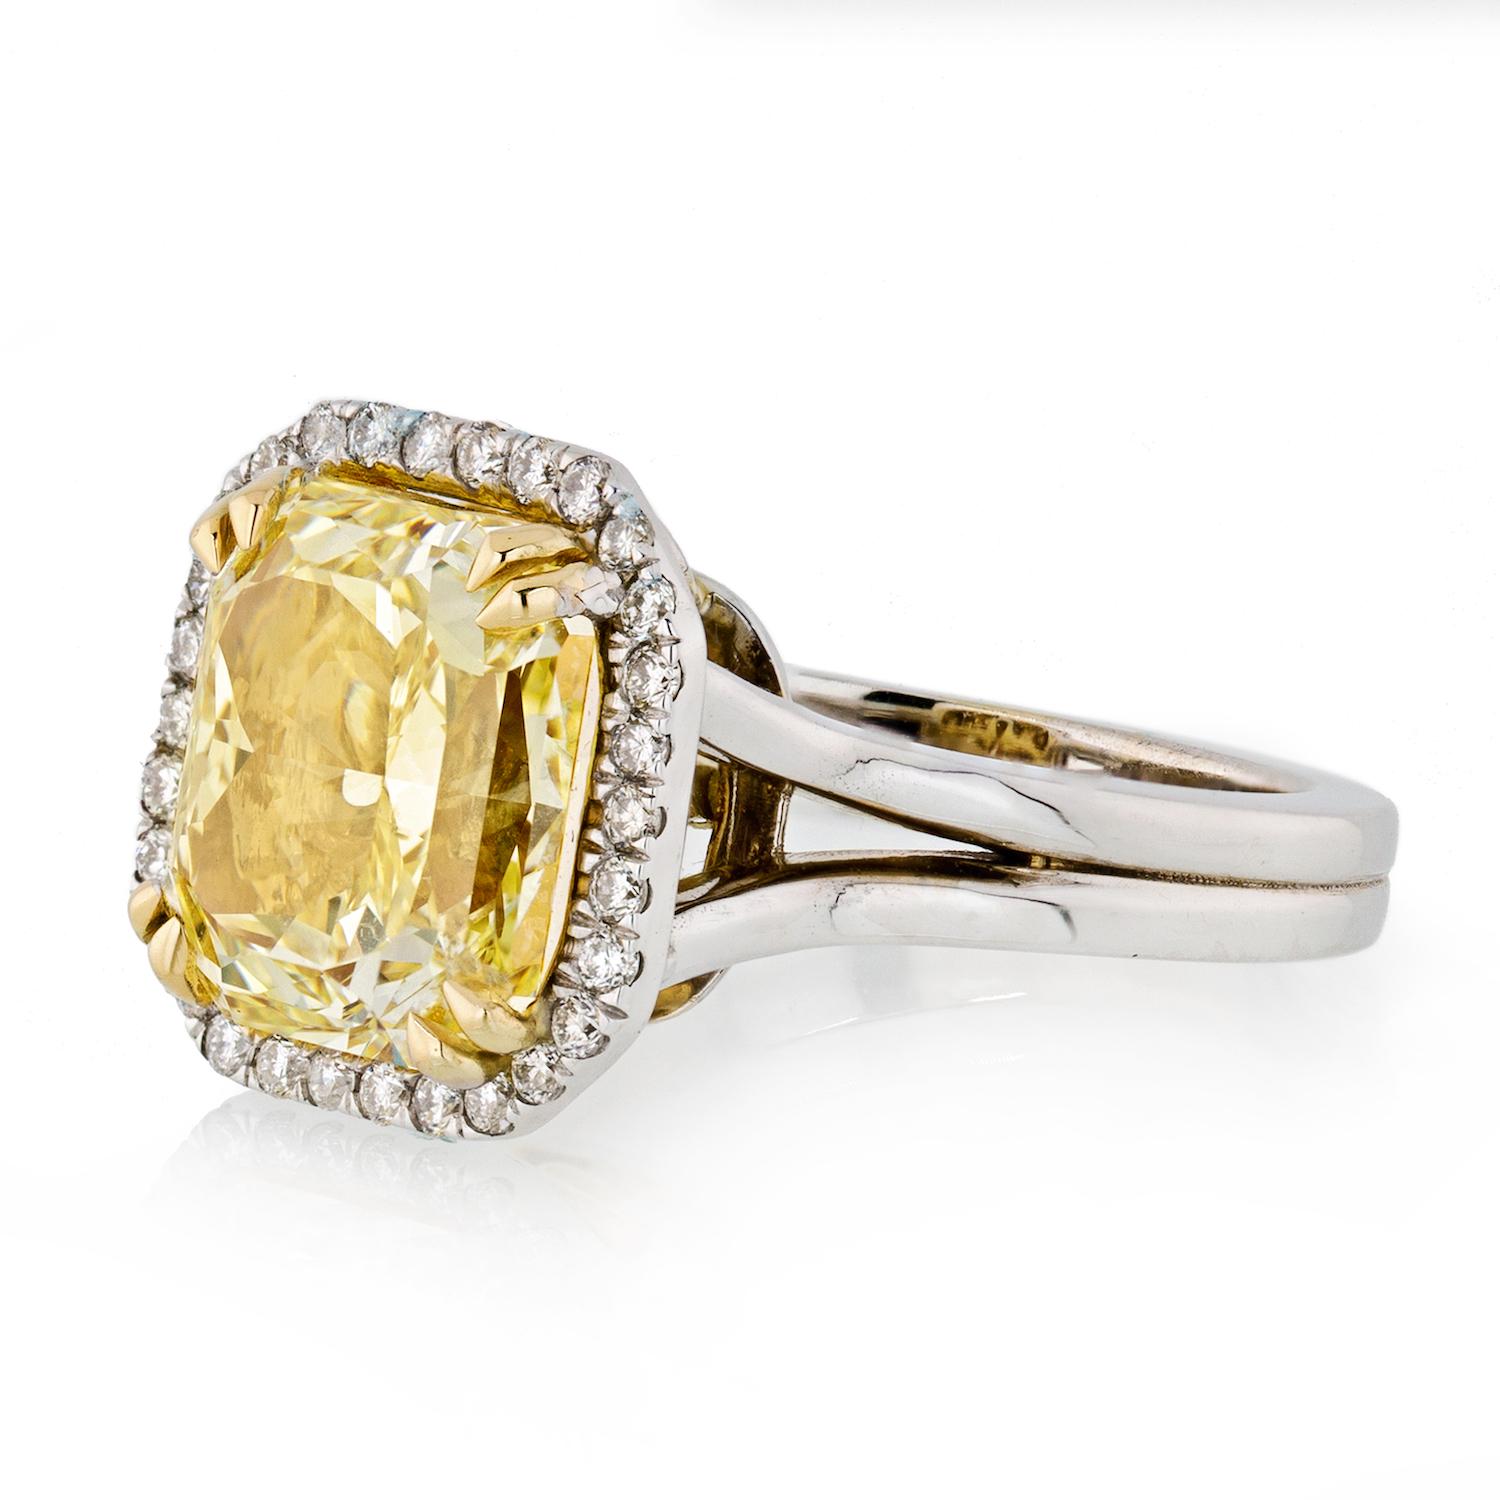 Stunning Fancy Yellow diamond ring crafted in platinum. You will be head over heels the moment you see this ring. Split shank ensures that this ring doesn't spin on your finger and the white pave diamonds serve as a sparkly backdrop. 

Elevated off